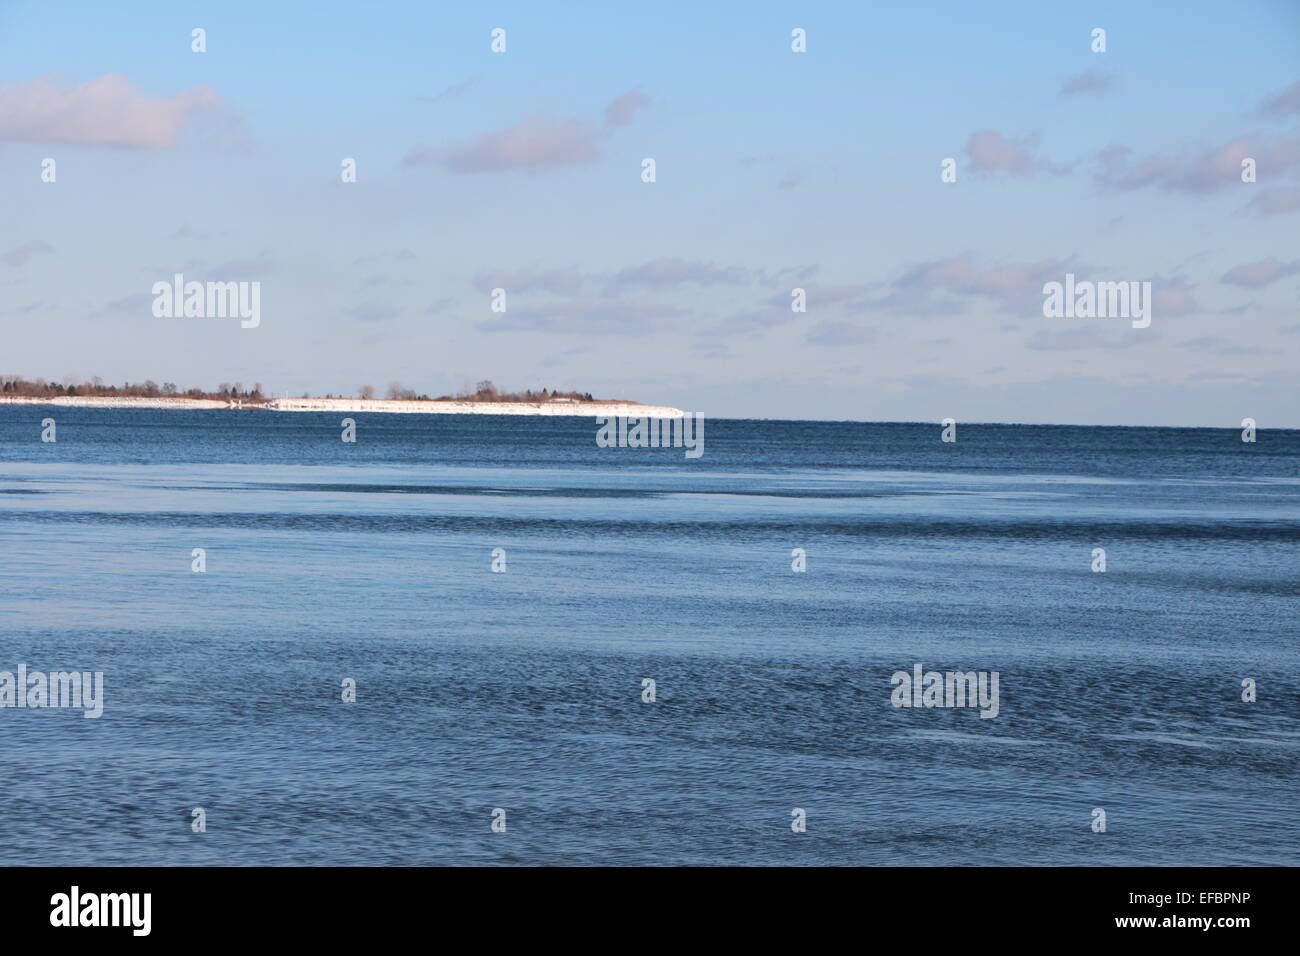 A windy day looking out at lake Ontario,with a blue sky with some clouds.wind is rippling the lake water. Stock Photo